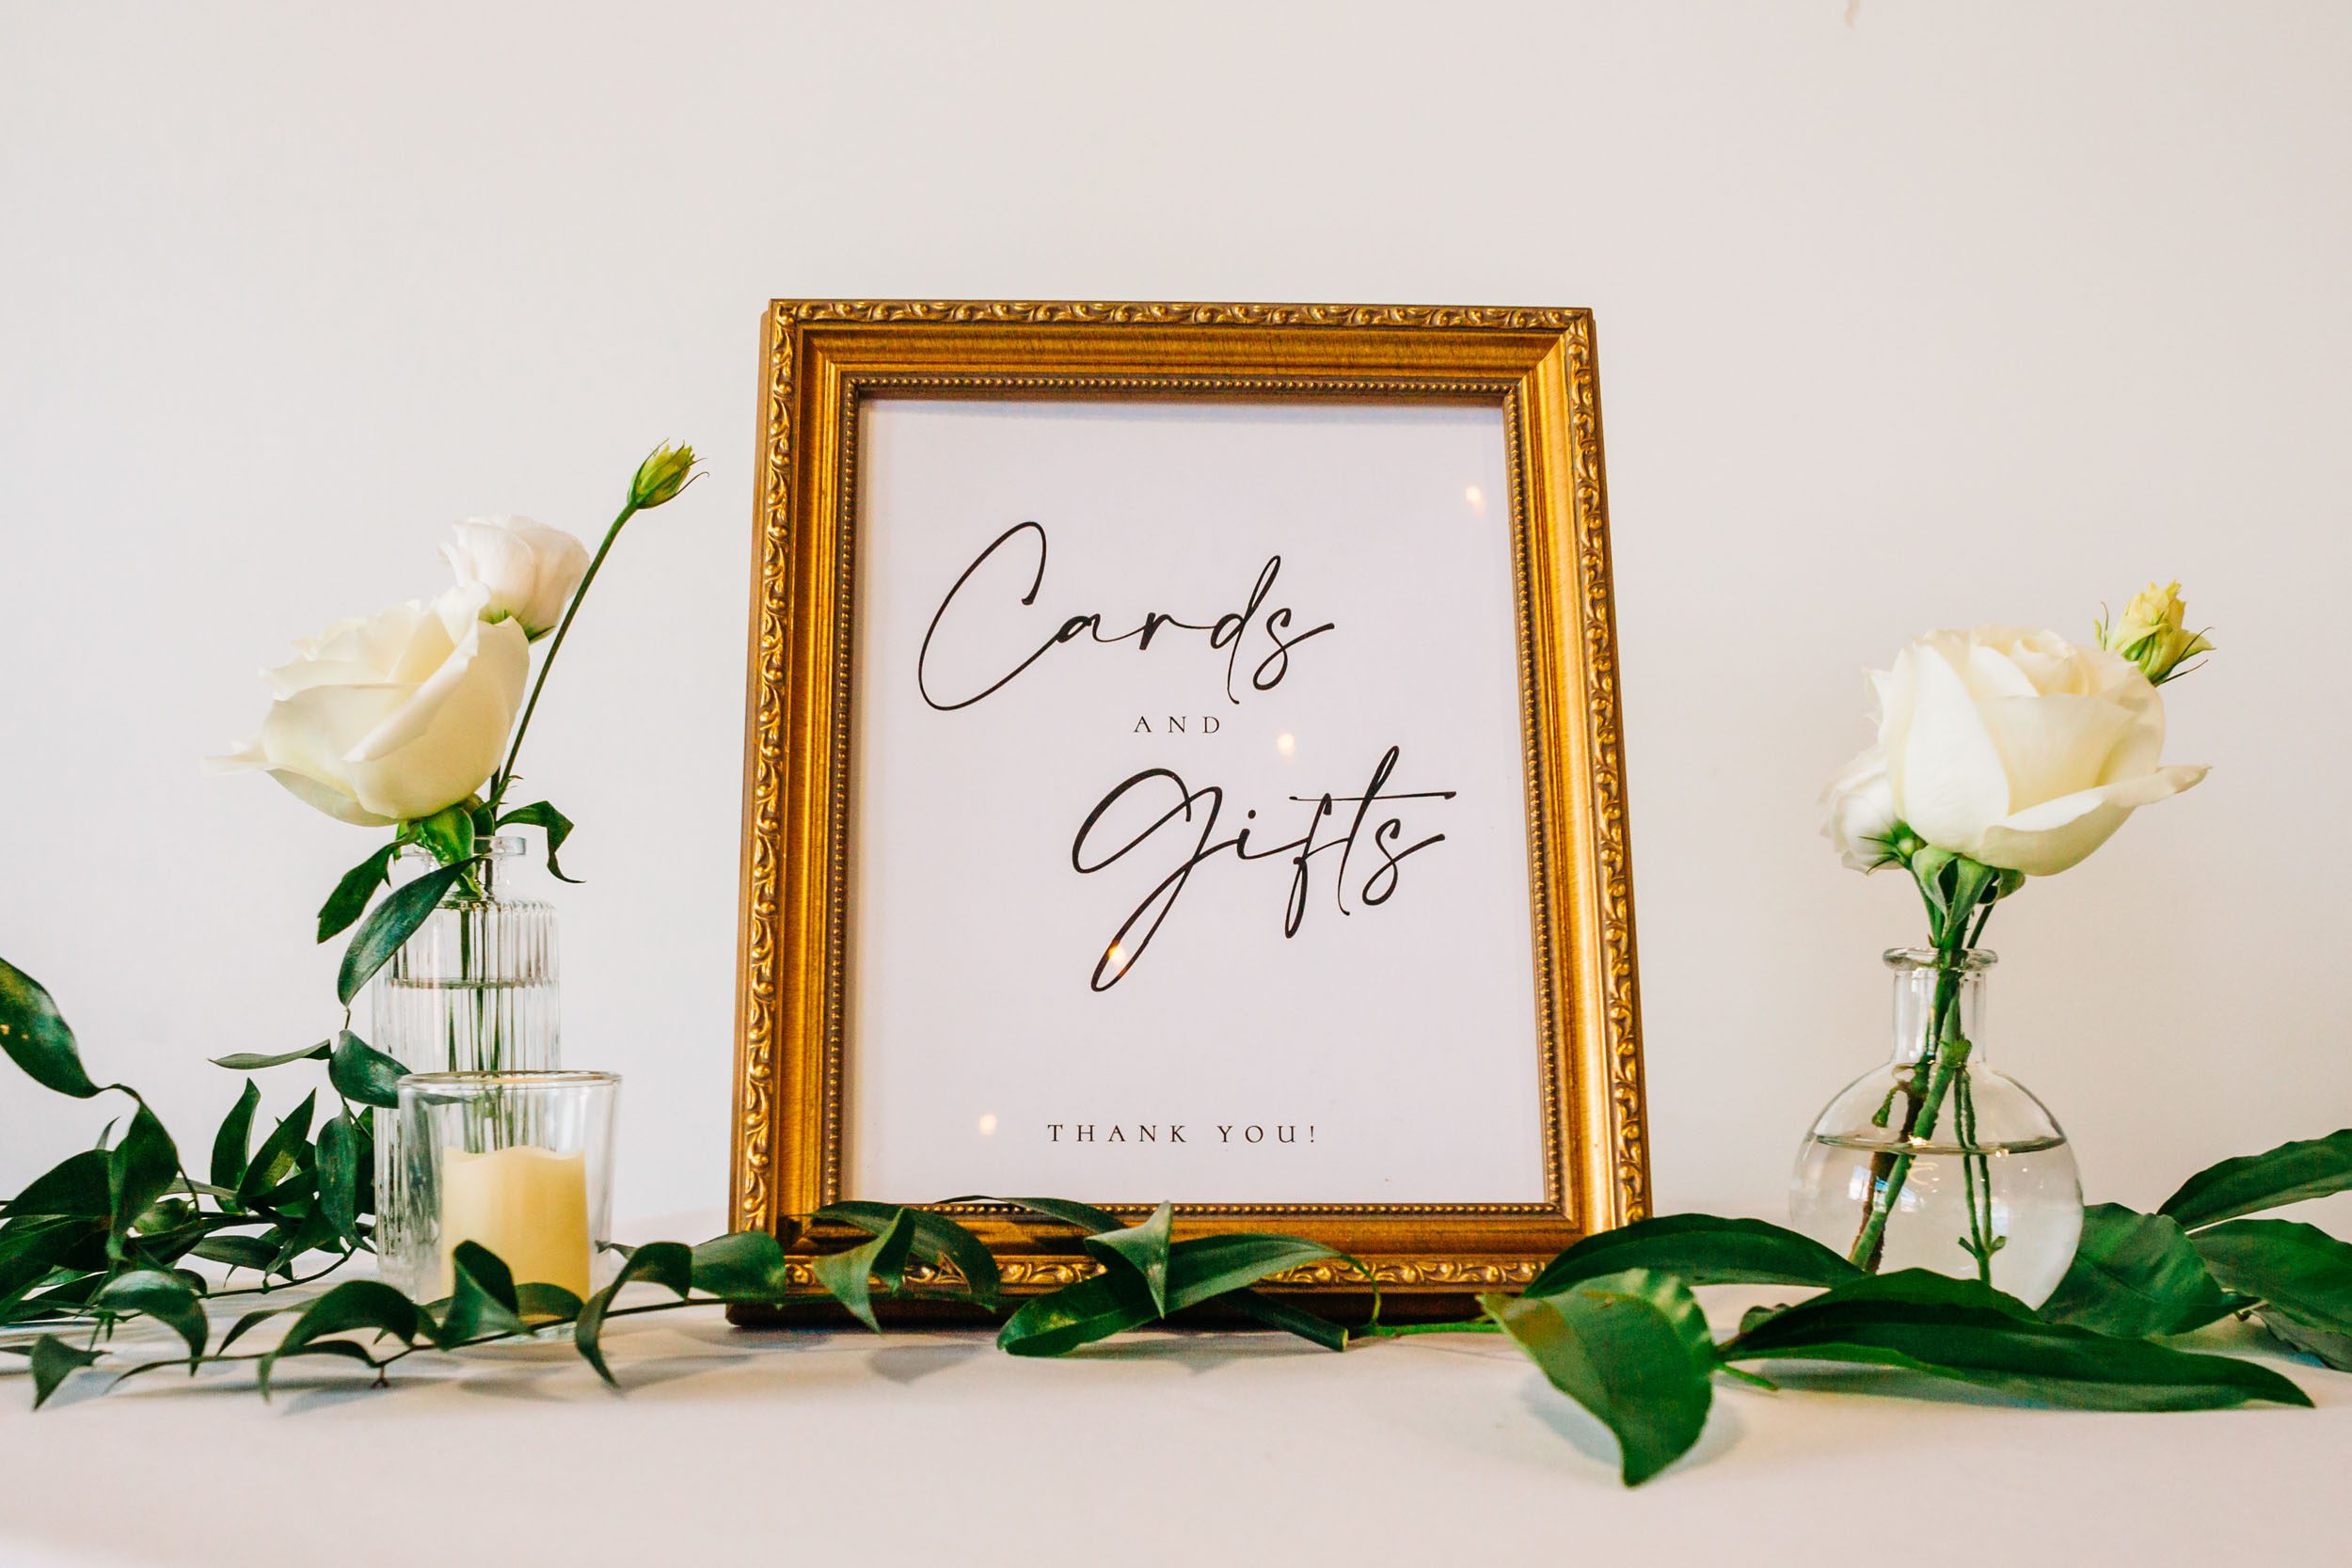 cards and gifts sign at wedding reception